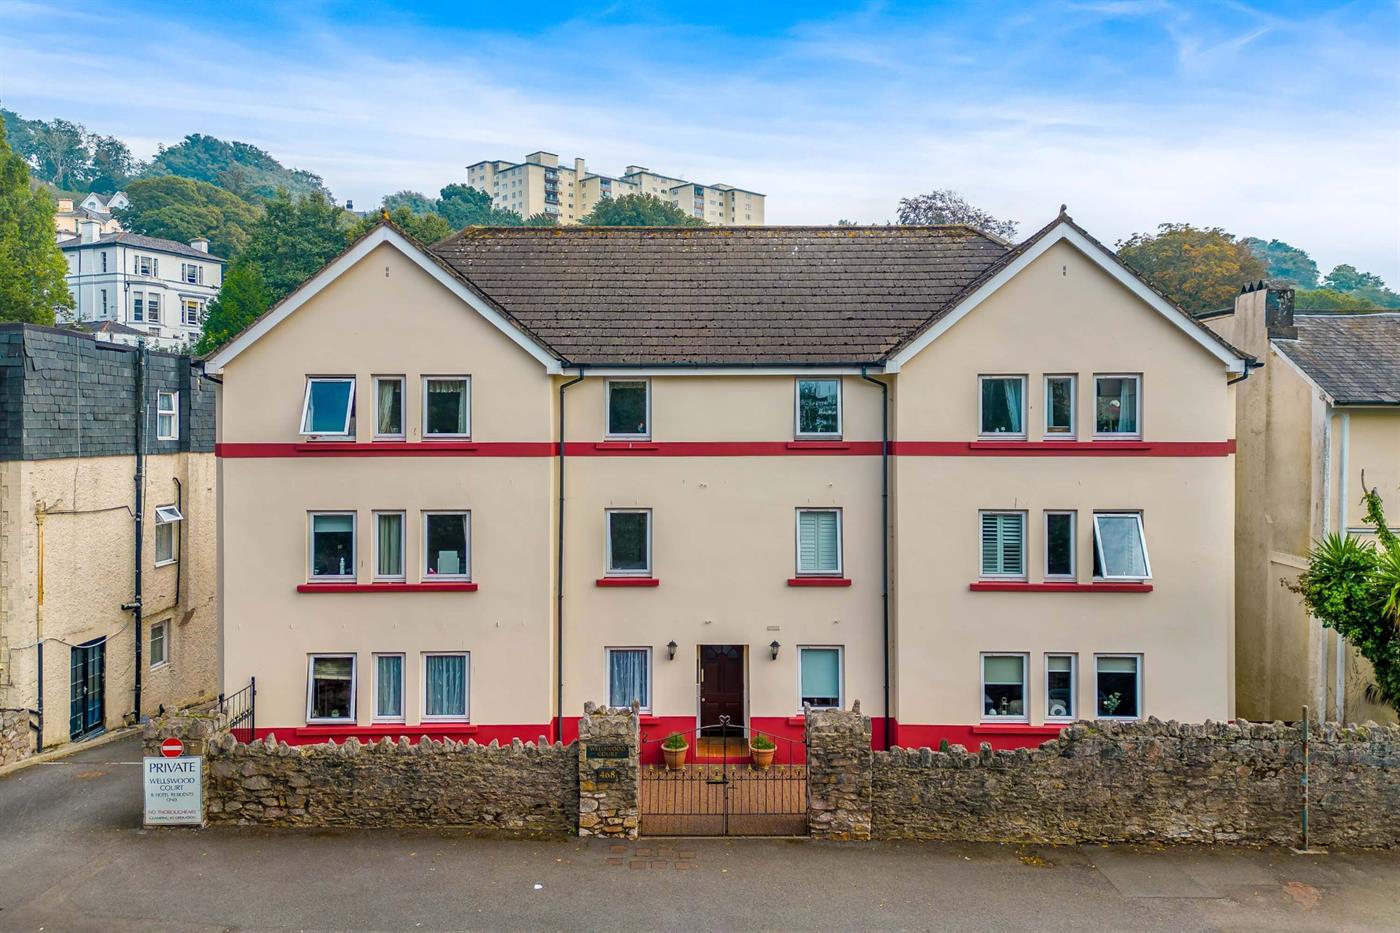 3 Bedroom Apartment for Sale: Wellswood Court,  Babbacombe Road, Torquay, TQ1 1HN